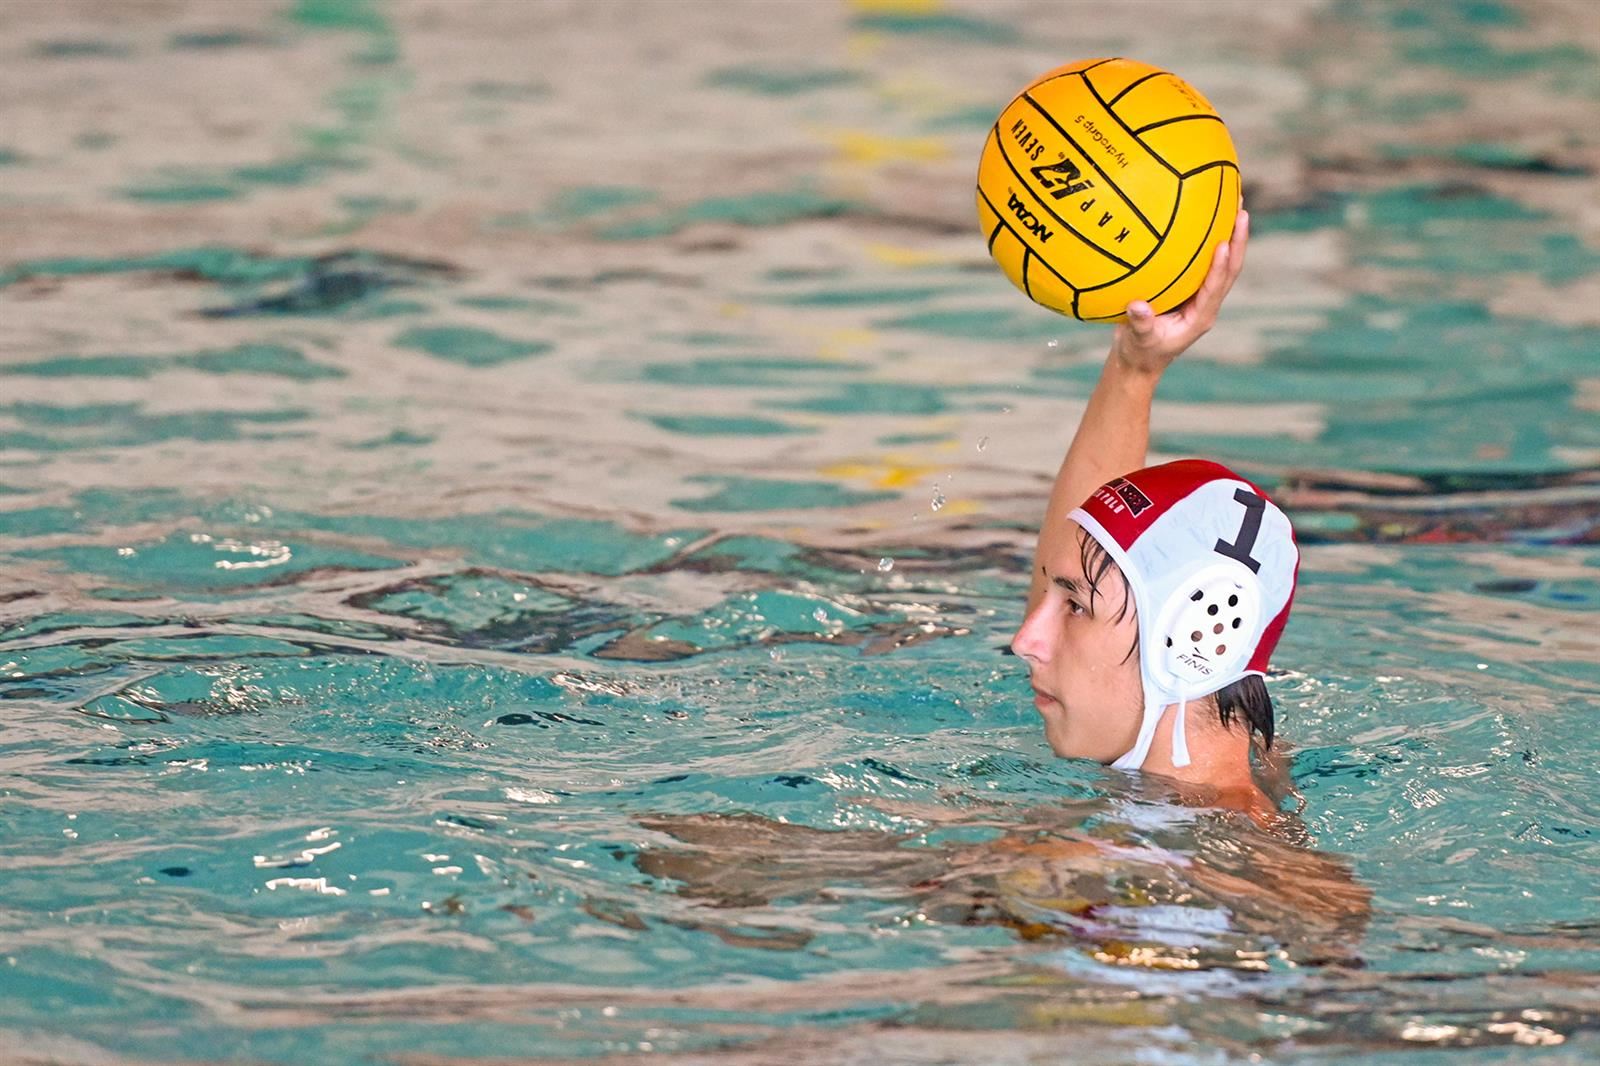 Langham Creek High School senior Nathan Lawson earned first-team honors on the District 16-6A boys’ water polo team.